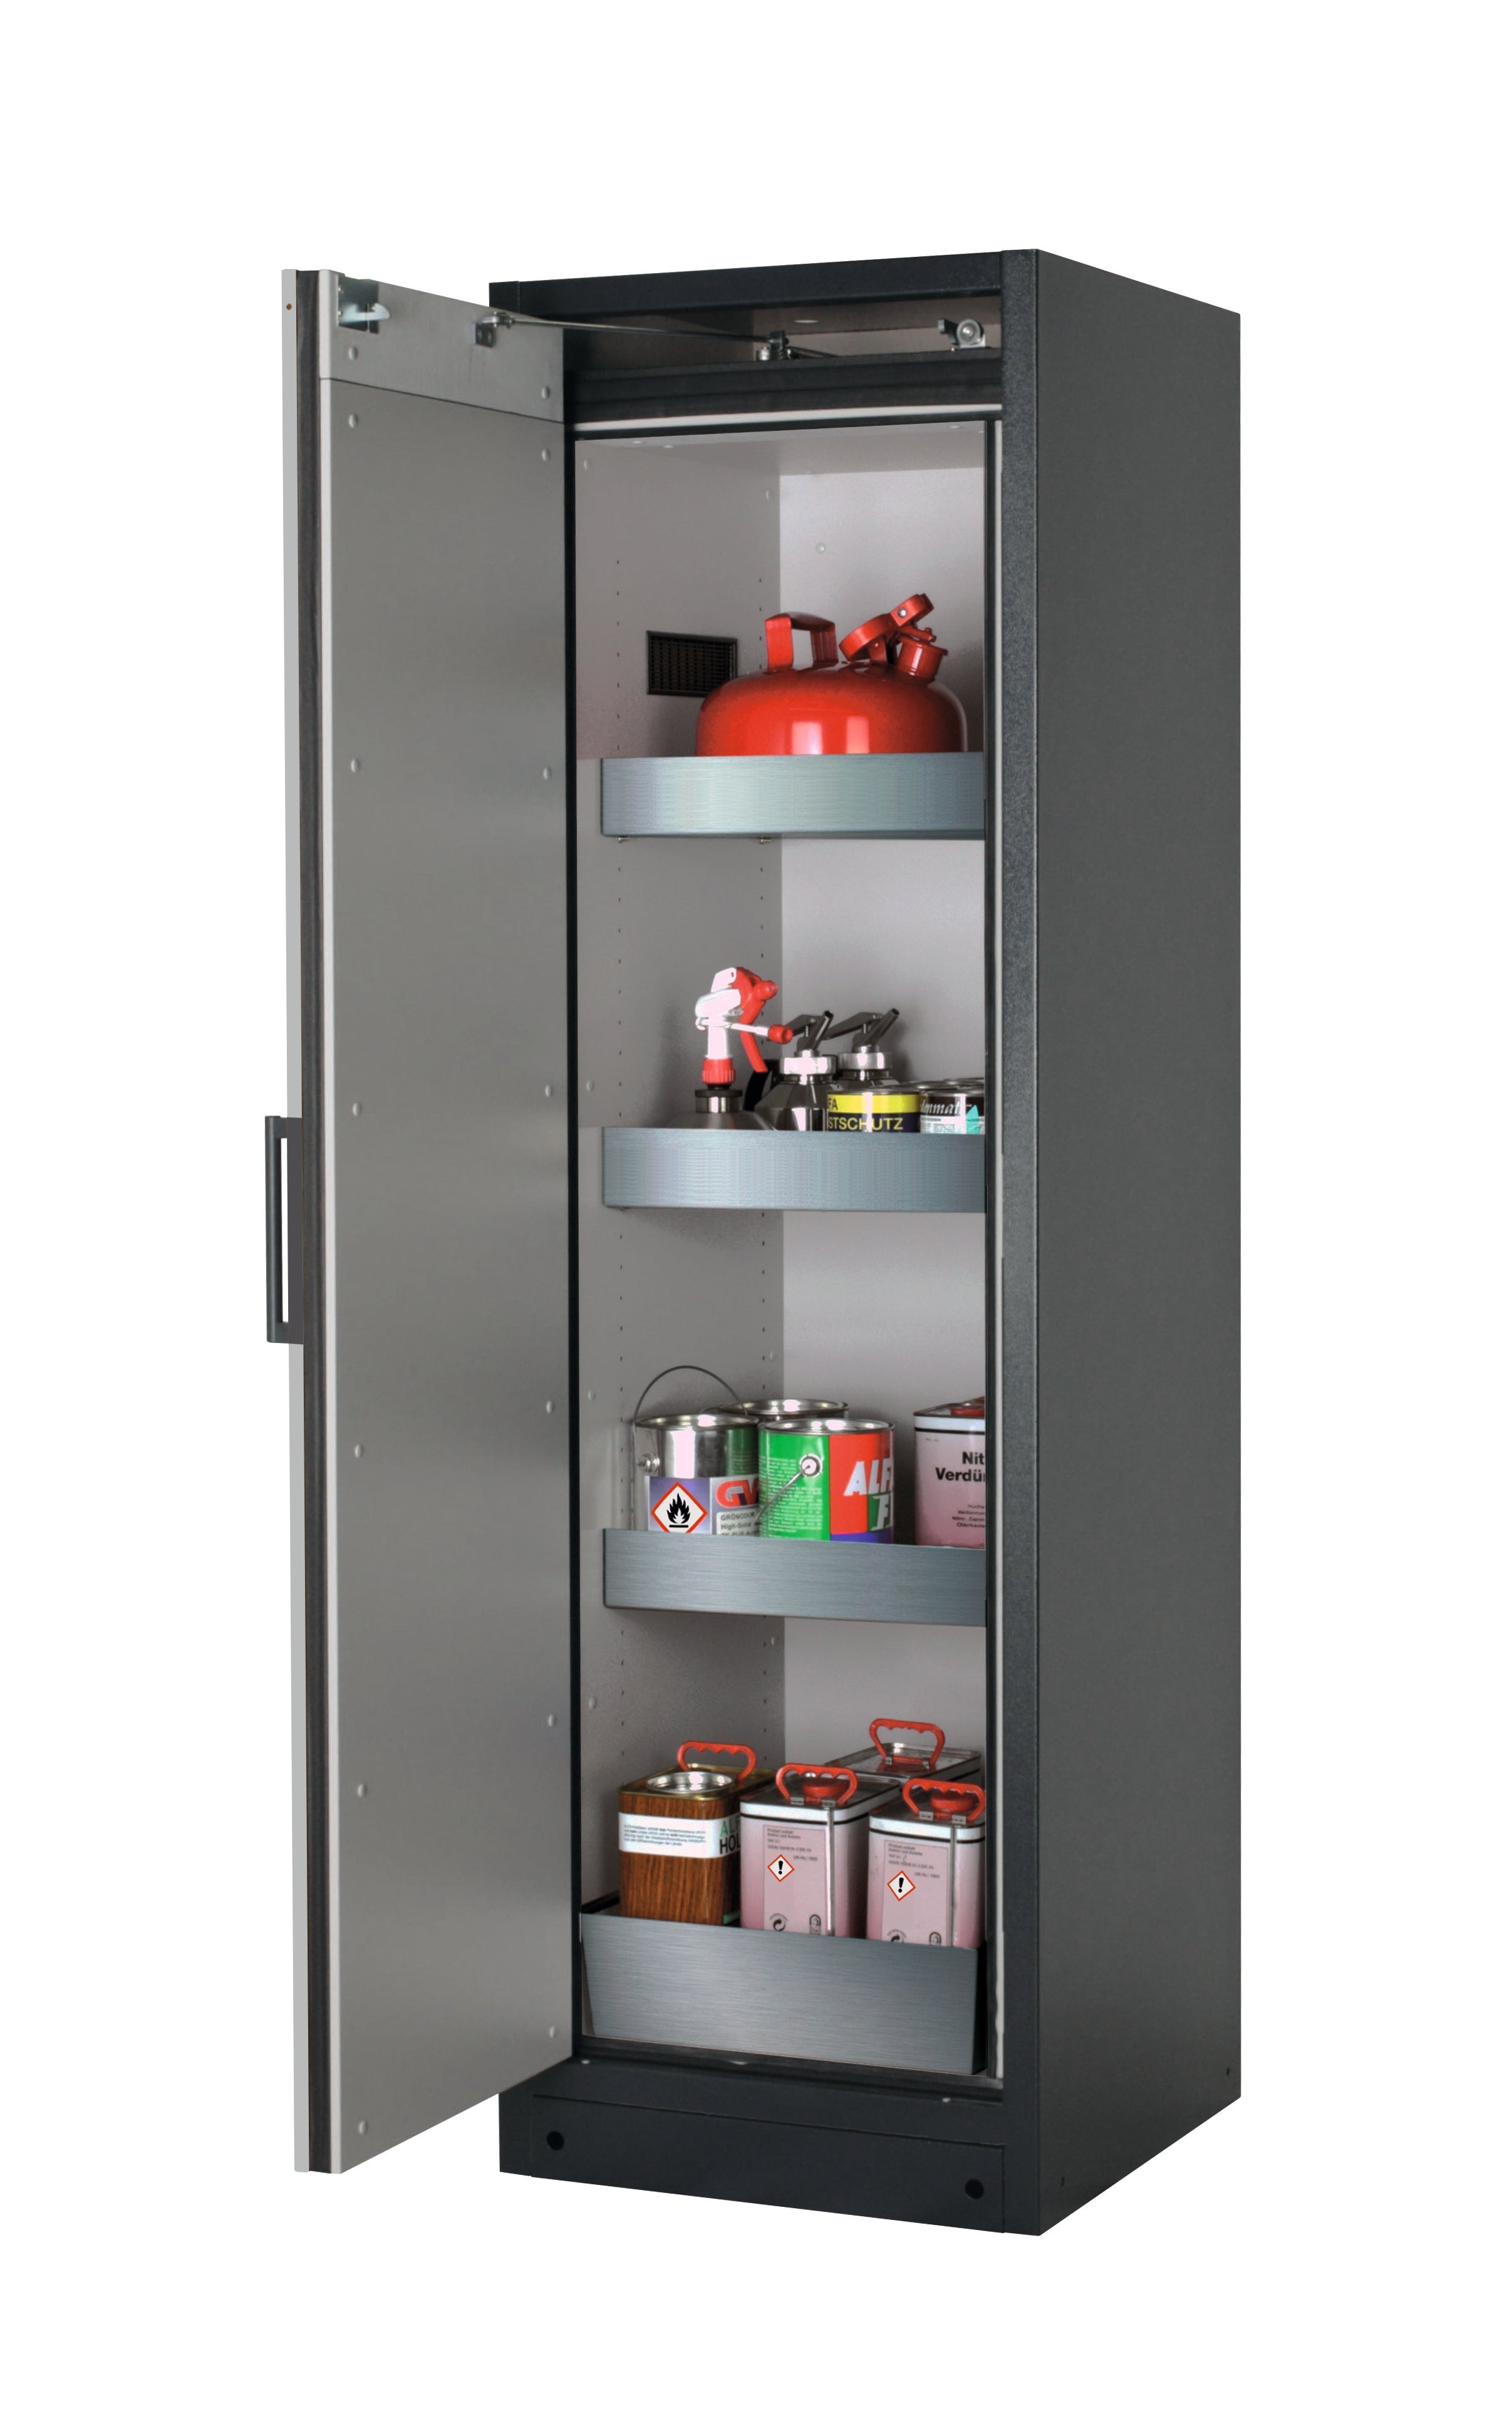 Type 90 safety storage cabinet Q-CLASSIC-90 model Q90.195.060 in pure white RAL 9010 with 3x tray shelf (standard) (stainless steel 1.4301),